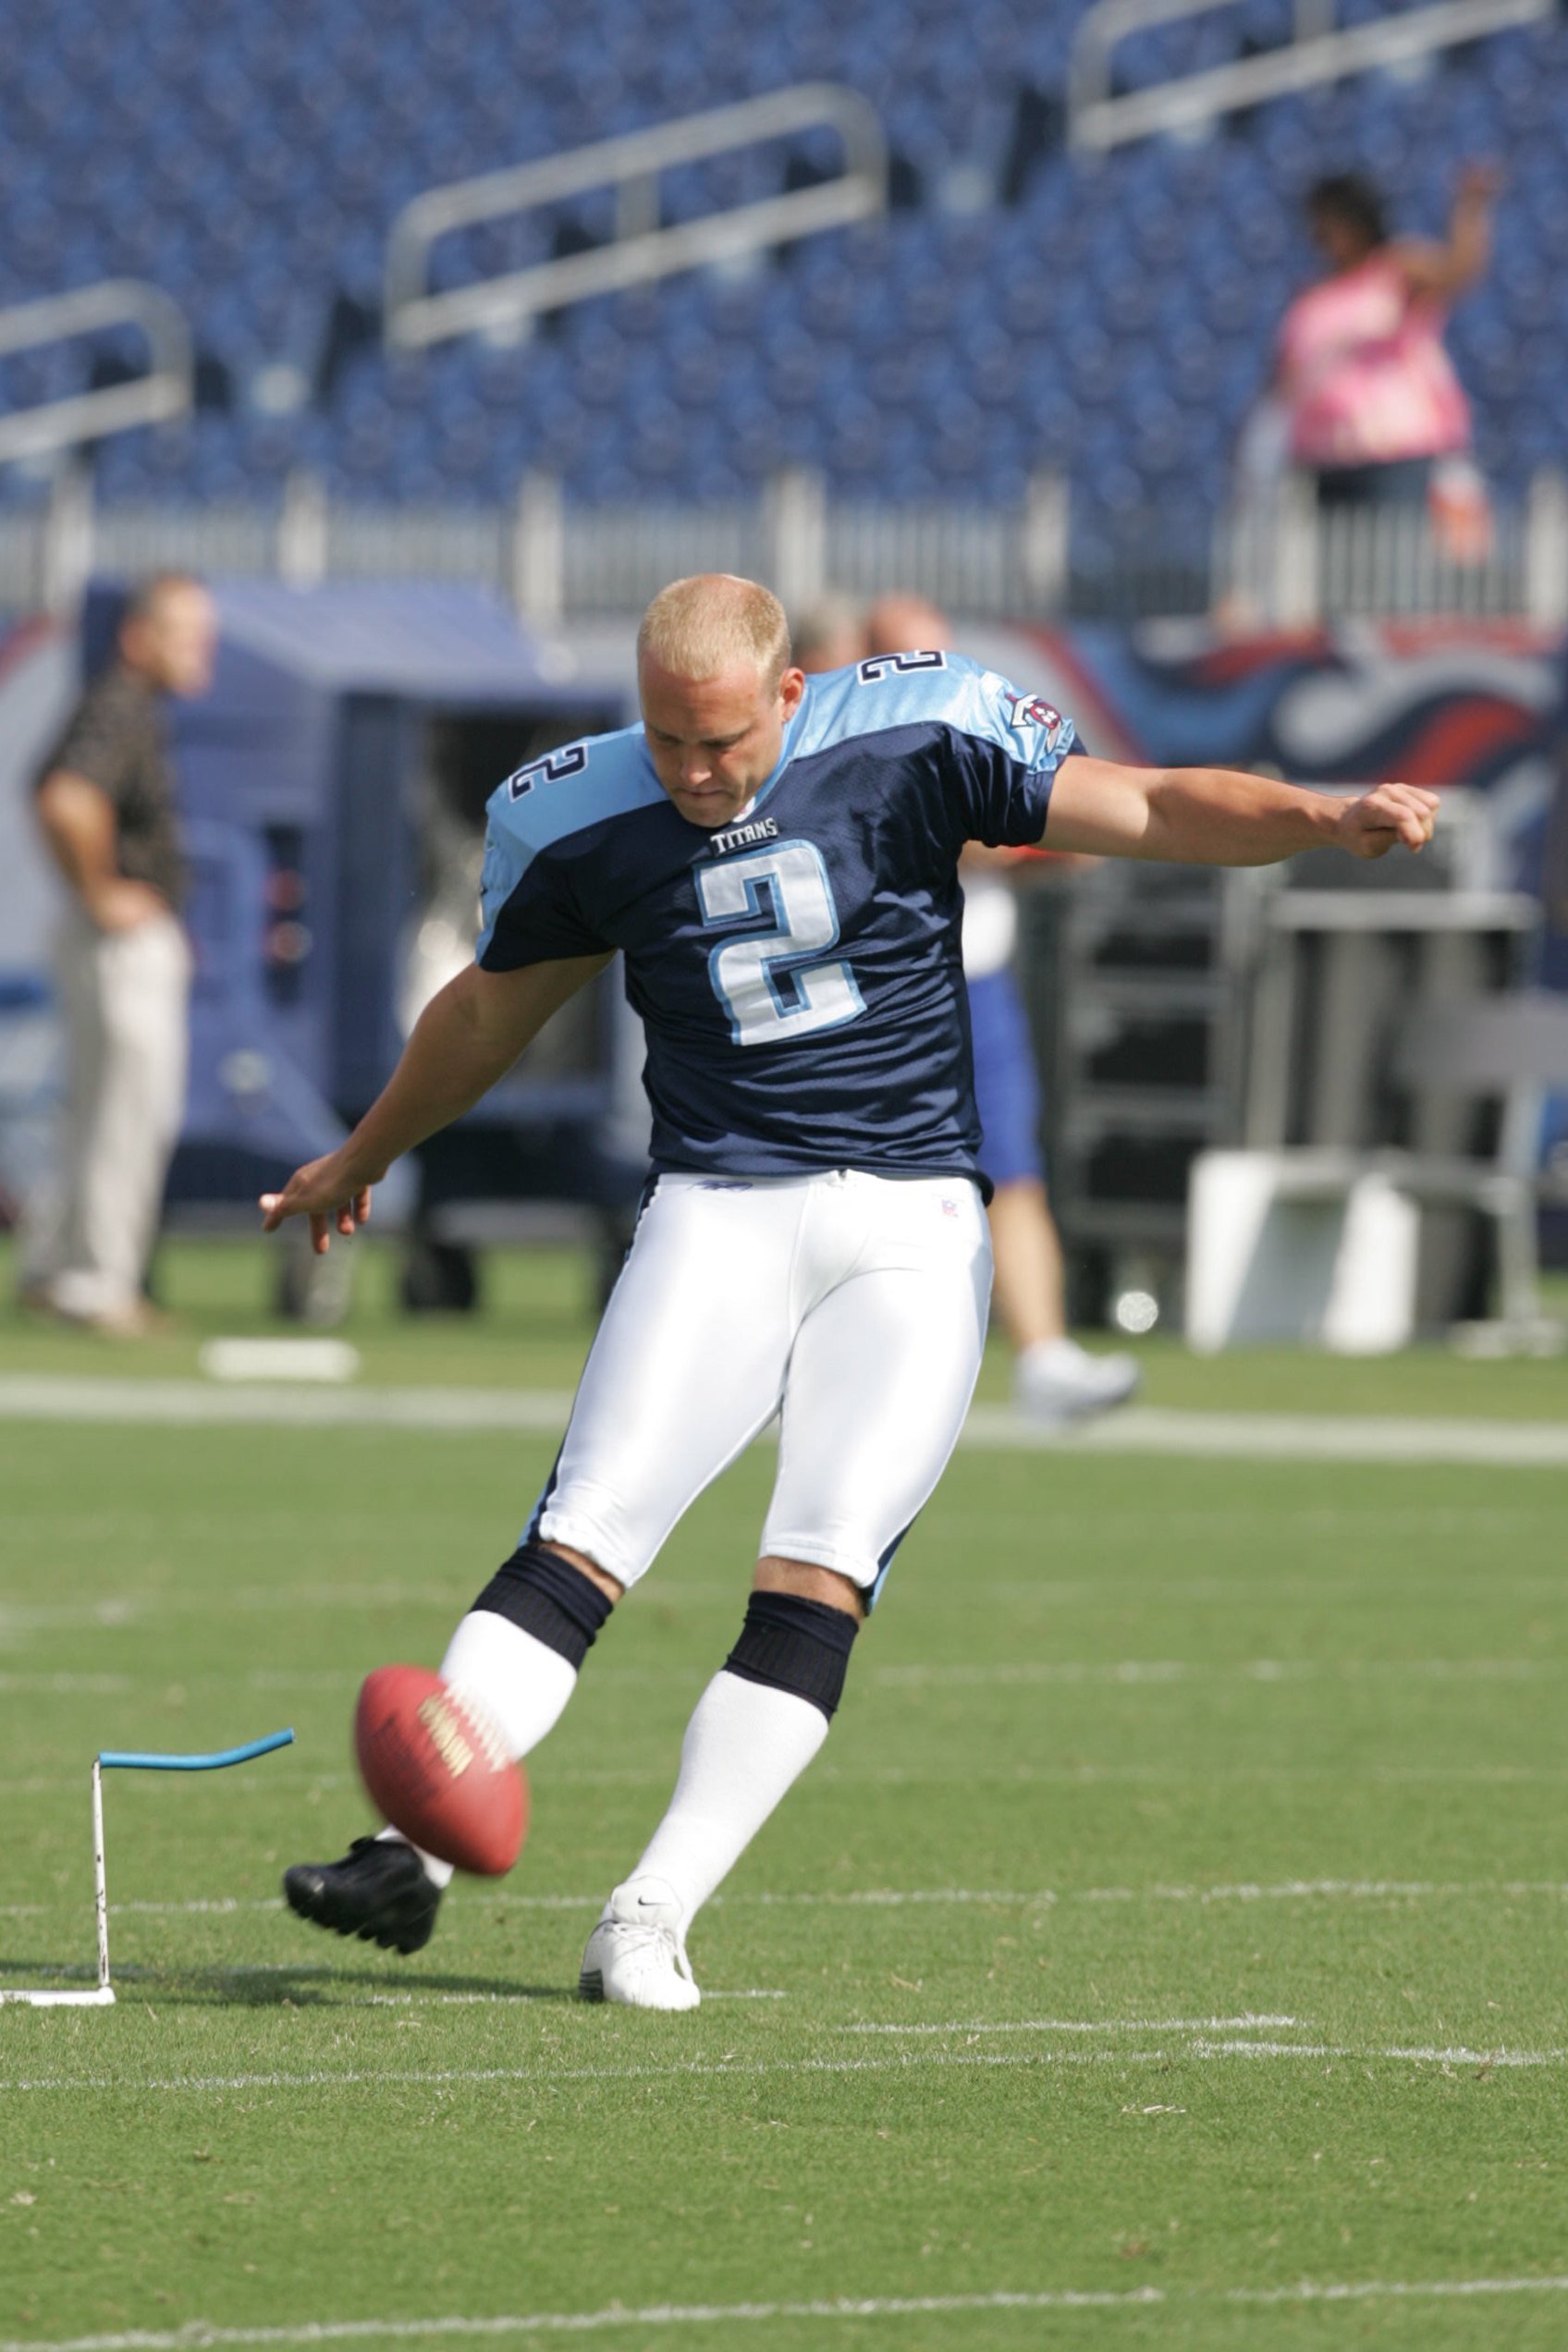 Rob Bironas of the Tennessee Titans participates in warm-ups before a game against the Baltimore Ravens at the LP Field in Nashville, Tennessee on September 18, 2005 | Source: Getty Images